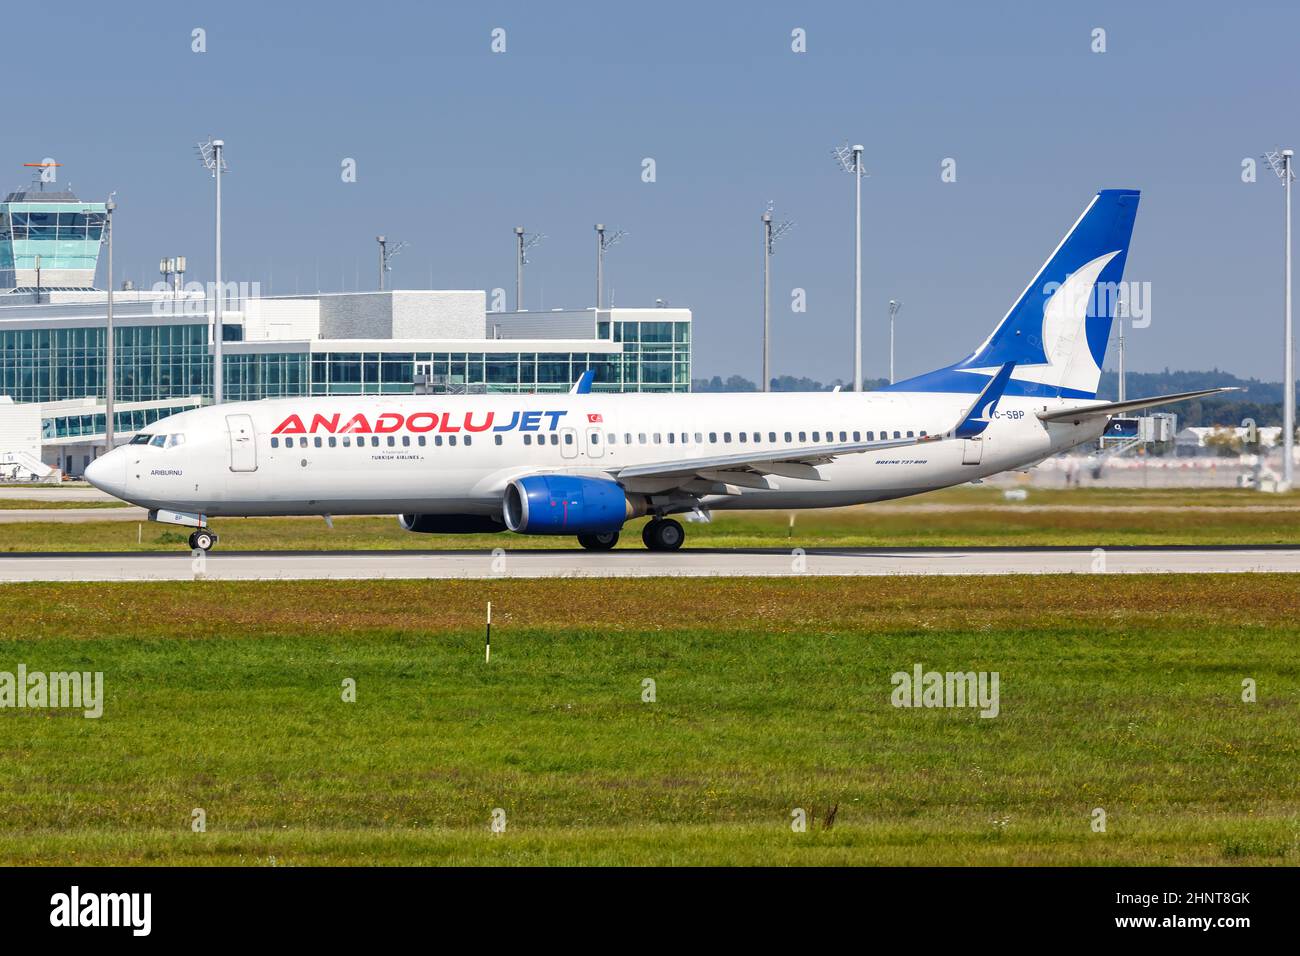 AnadoluJet Boeing 737-800 airplane Munich airport in Germany Stock Photo